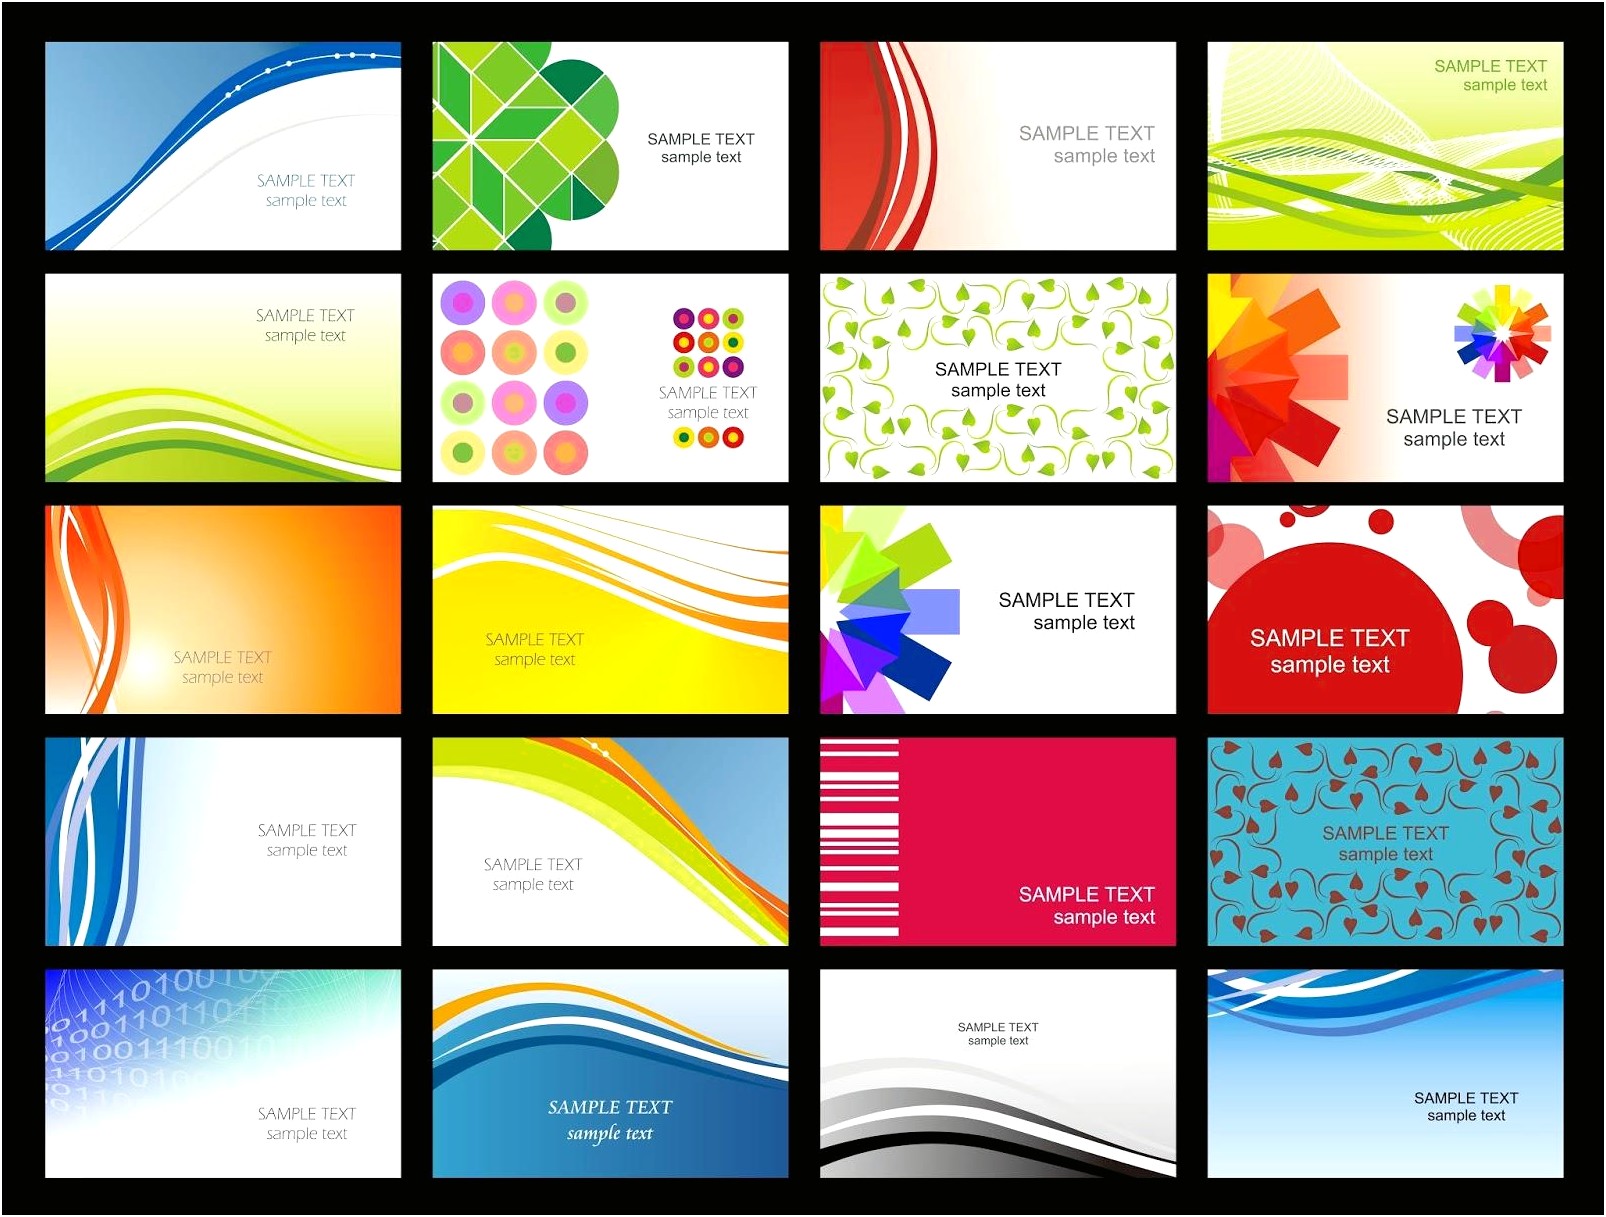 Downloadable Free Blank Business Card Templates